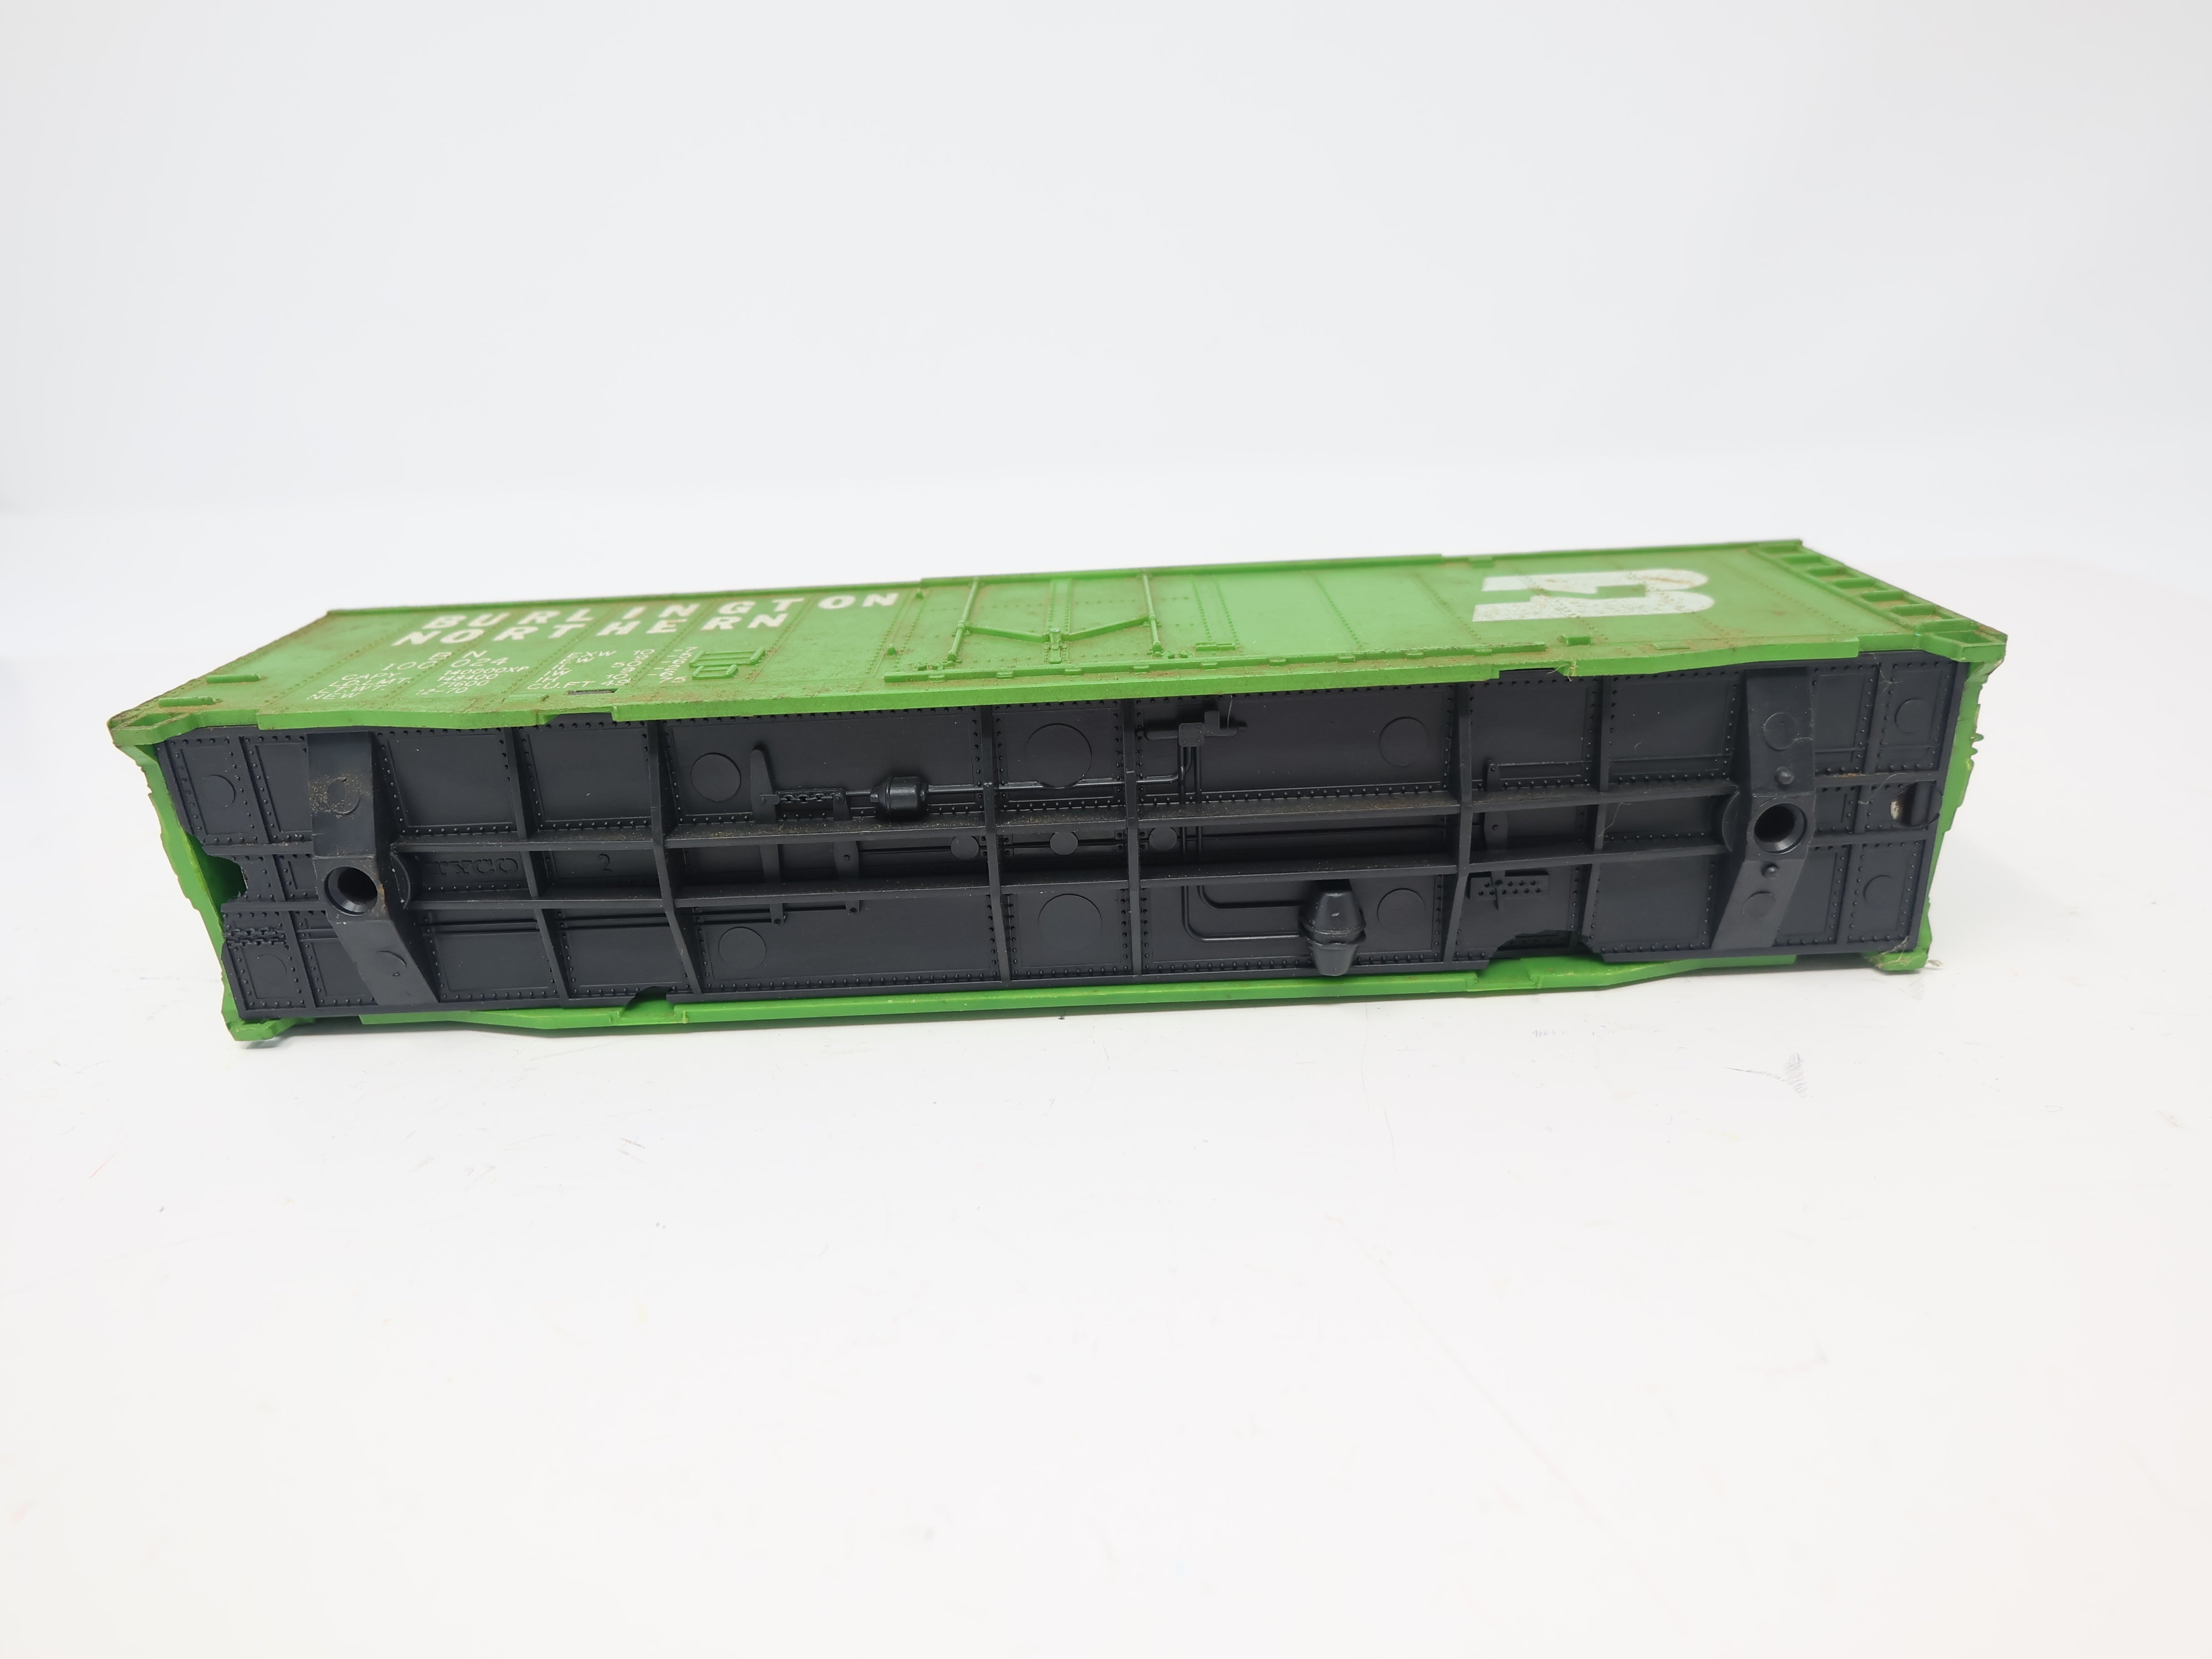 USED Tyco HO Scale, 50' Box Car (shell only), Burlington Northern BN #100024